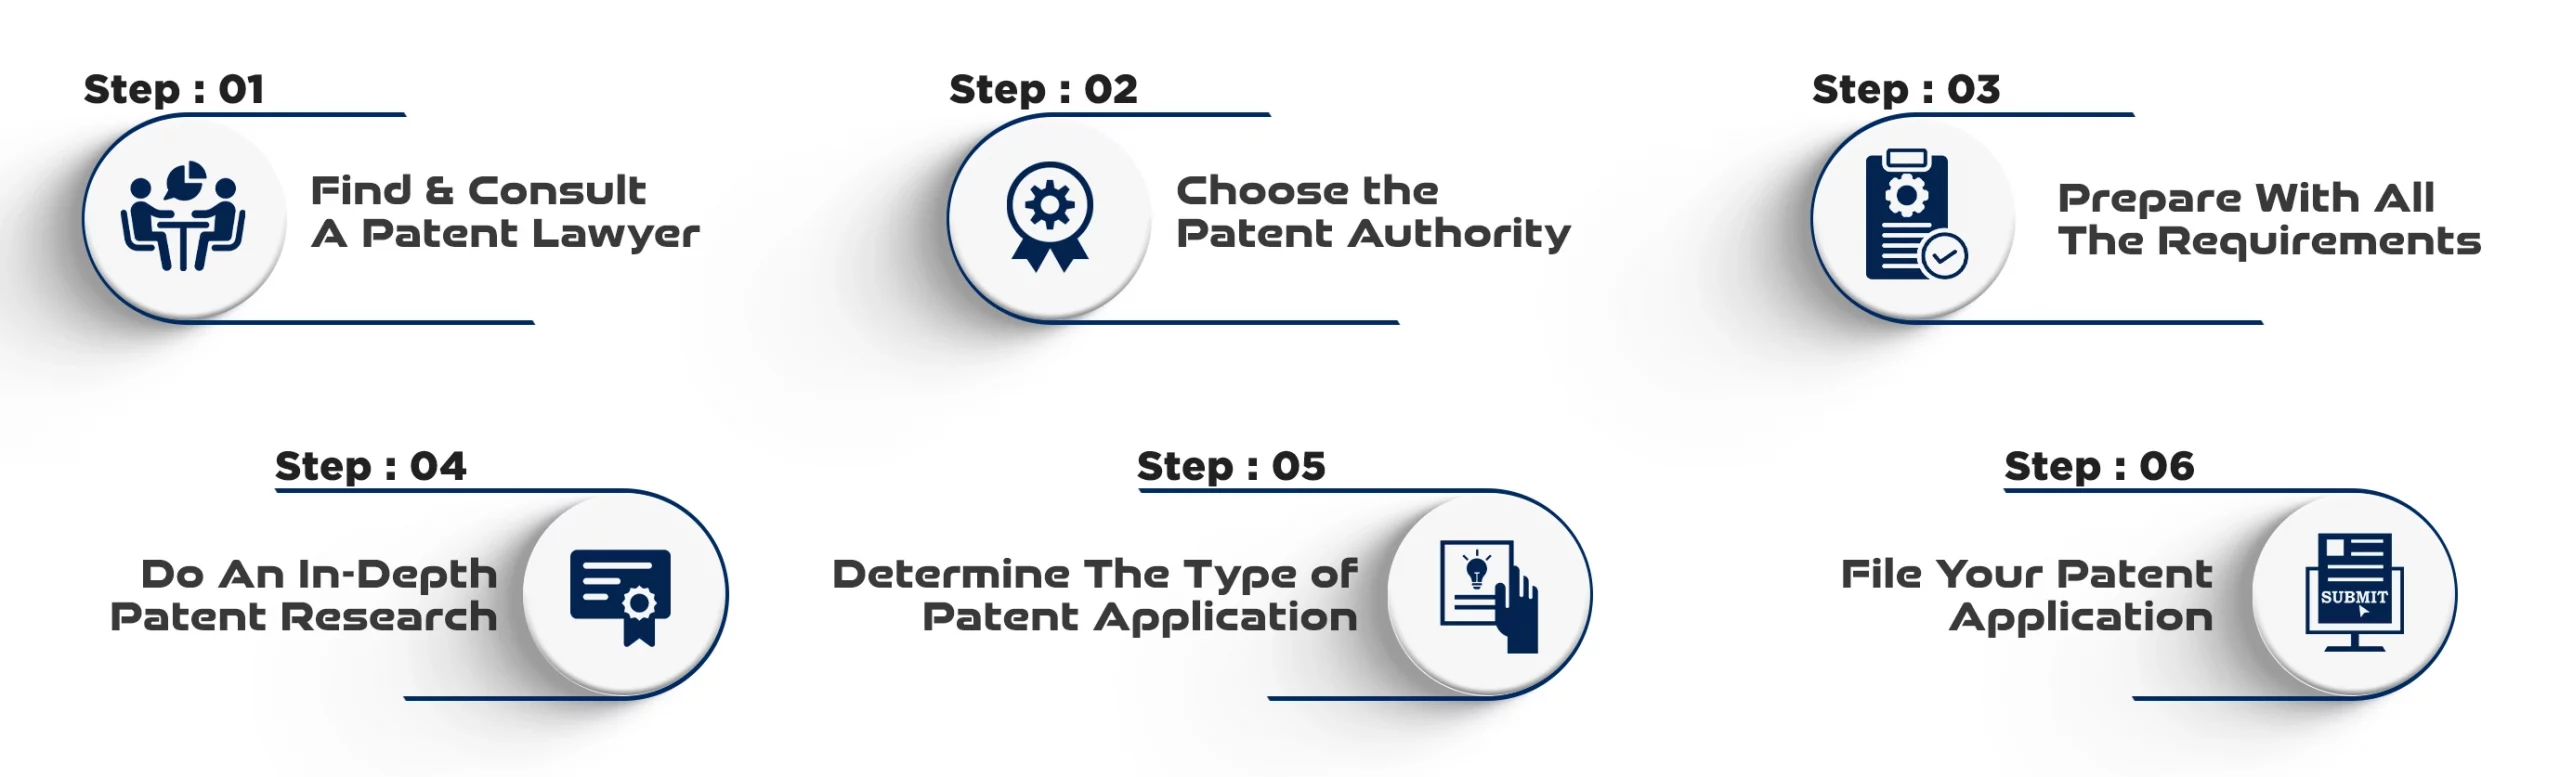 How to Patent A Mobile App - Steps To Follow 